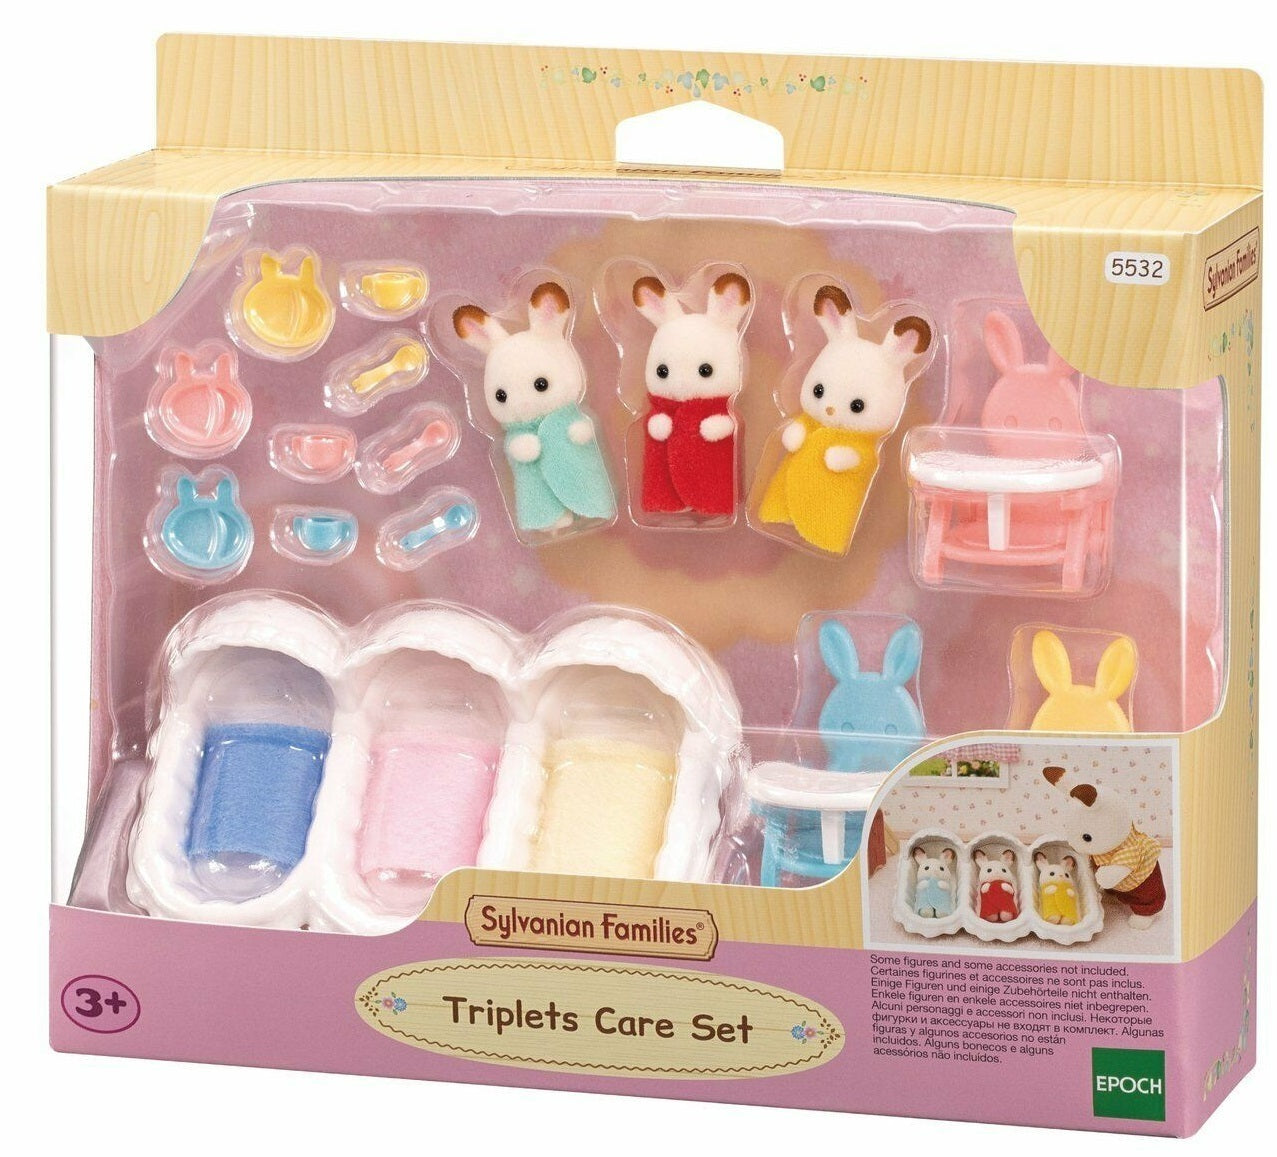 Sylvanian Families 5532 Triplets Care Set in box